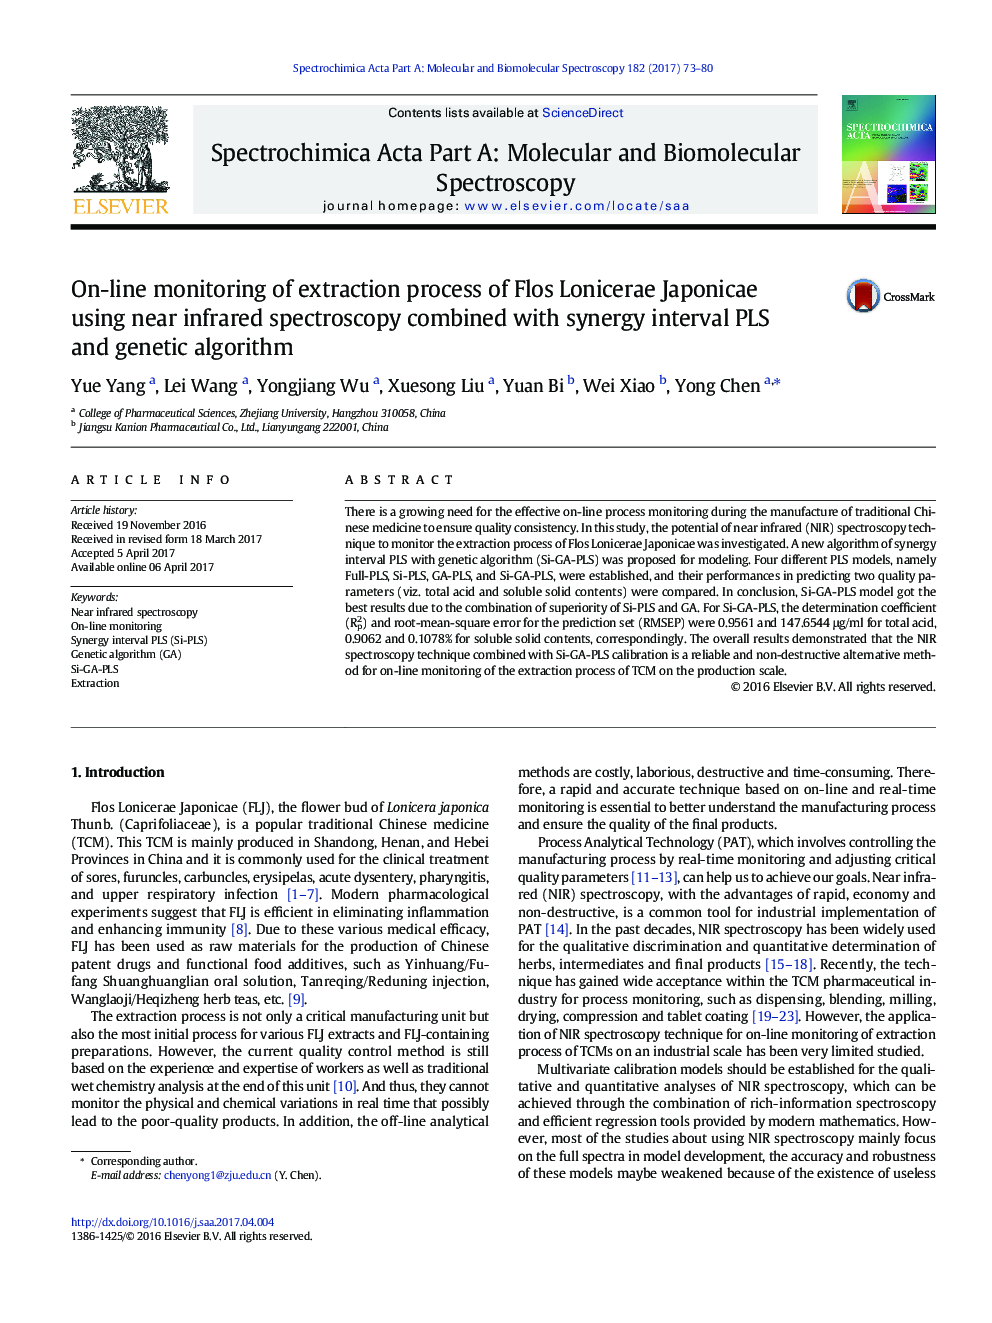 On-line monitoring of extraction process of Flos Lonicerae Japonicae using near infrared spectroscopy combined with synergy interval PLS and genetic algorithm